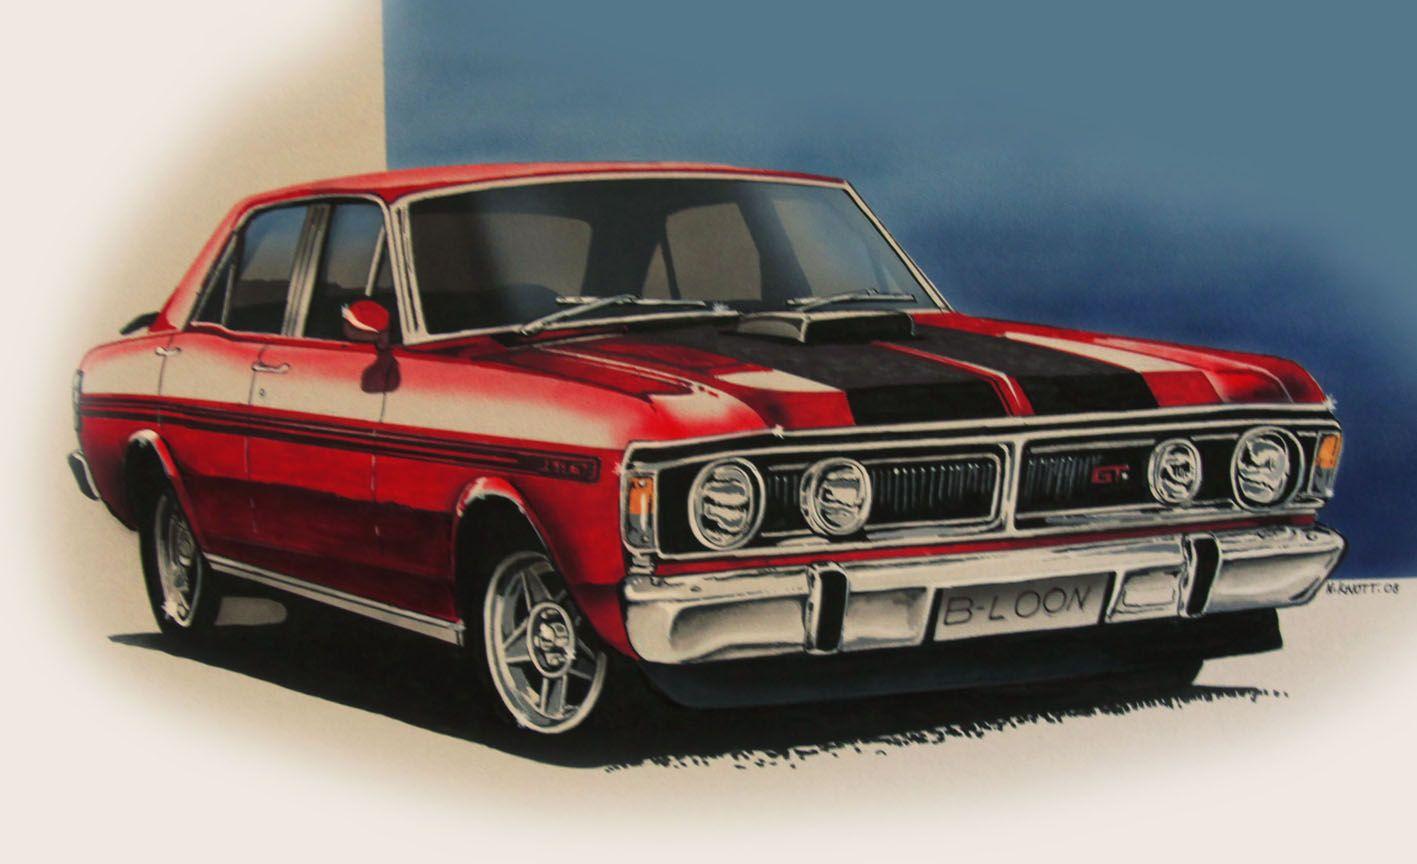 1969 Ford Falcon Wallpapers